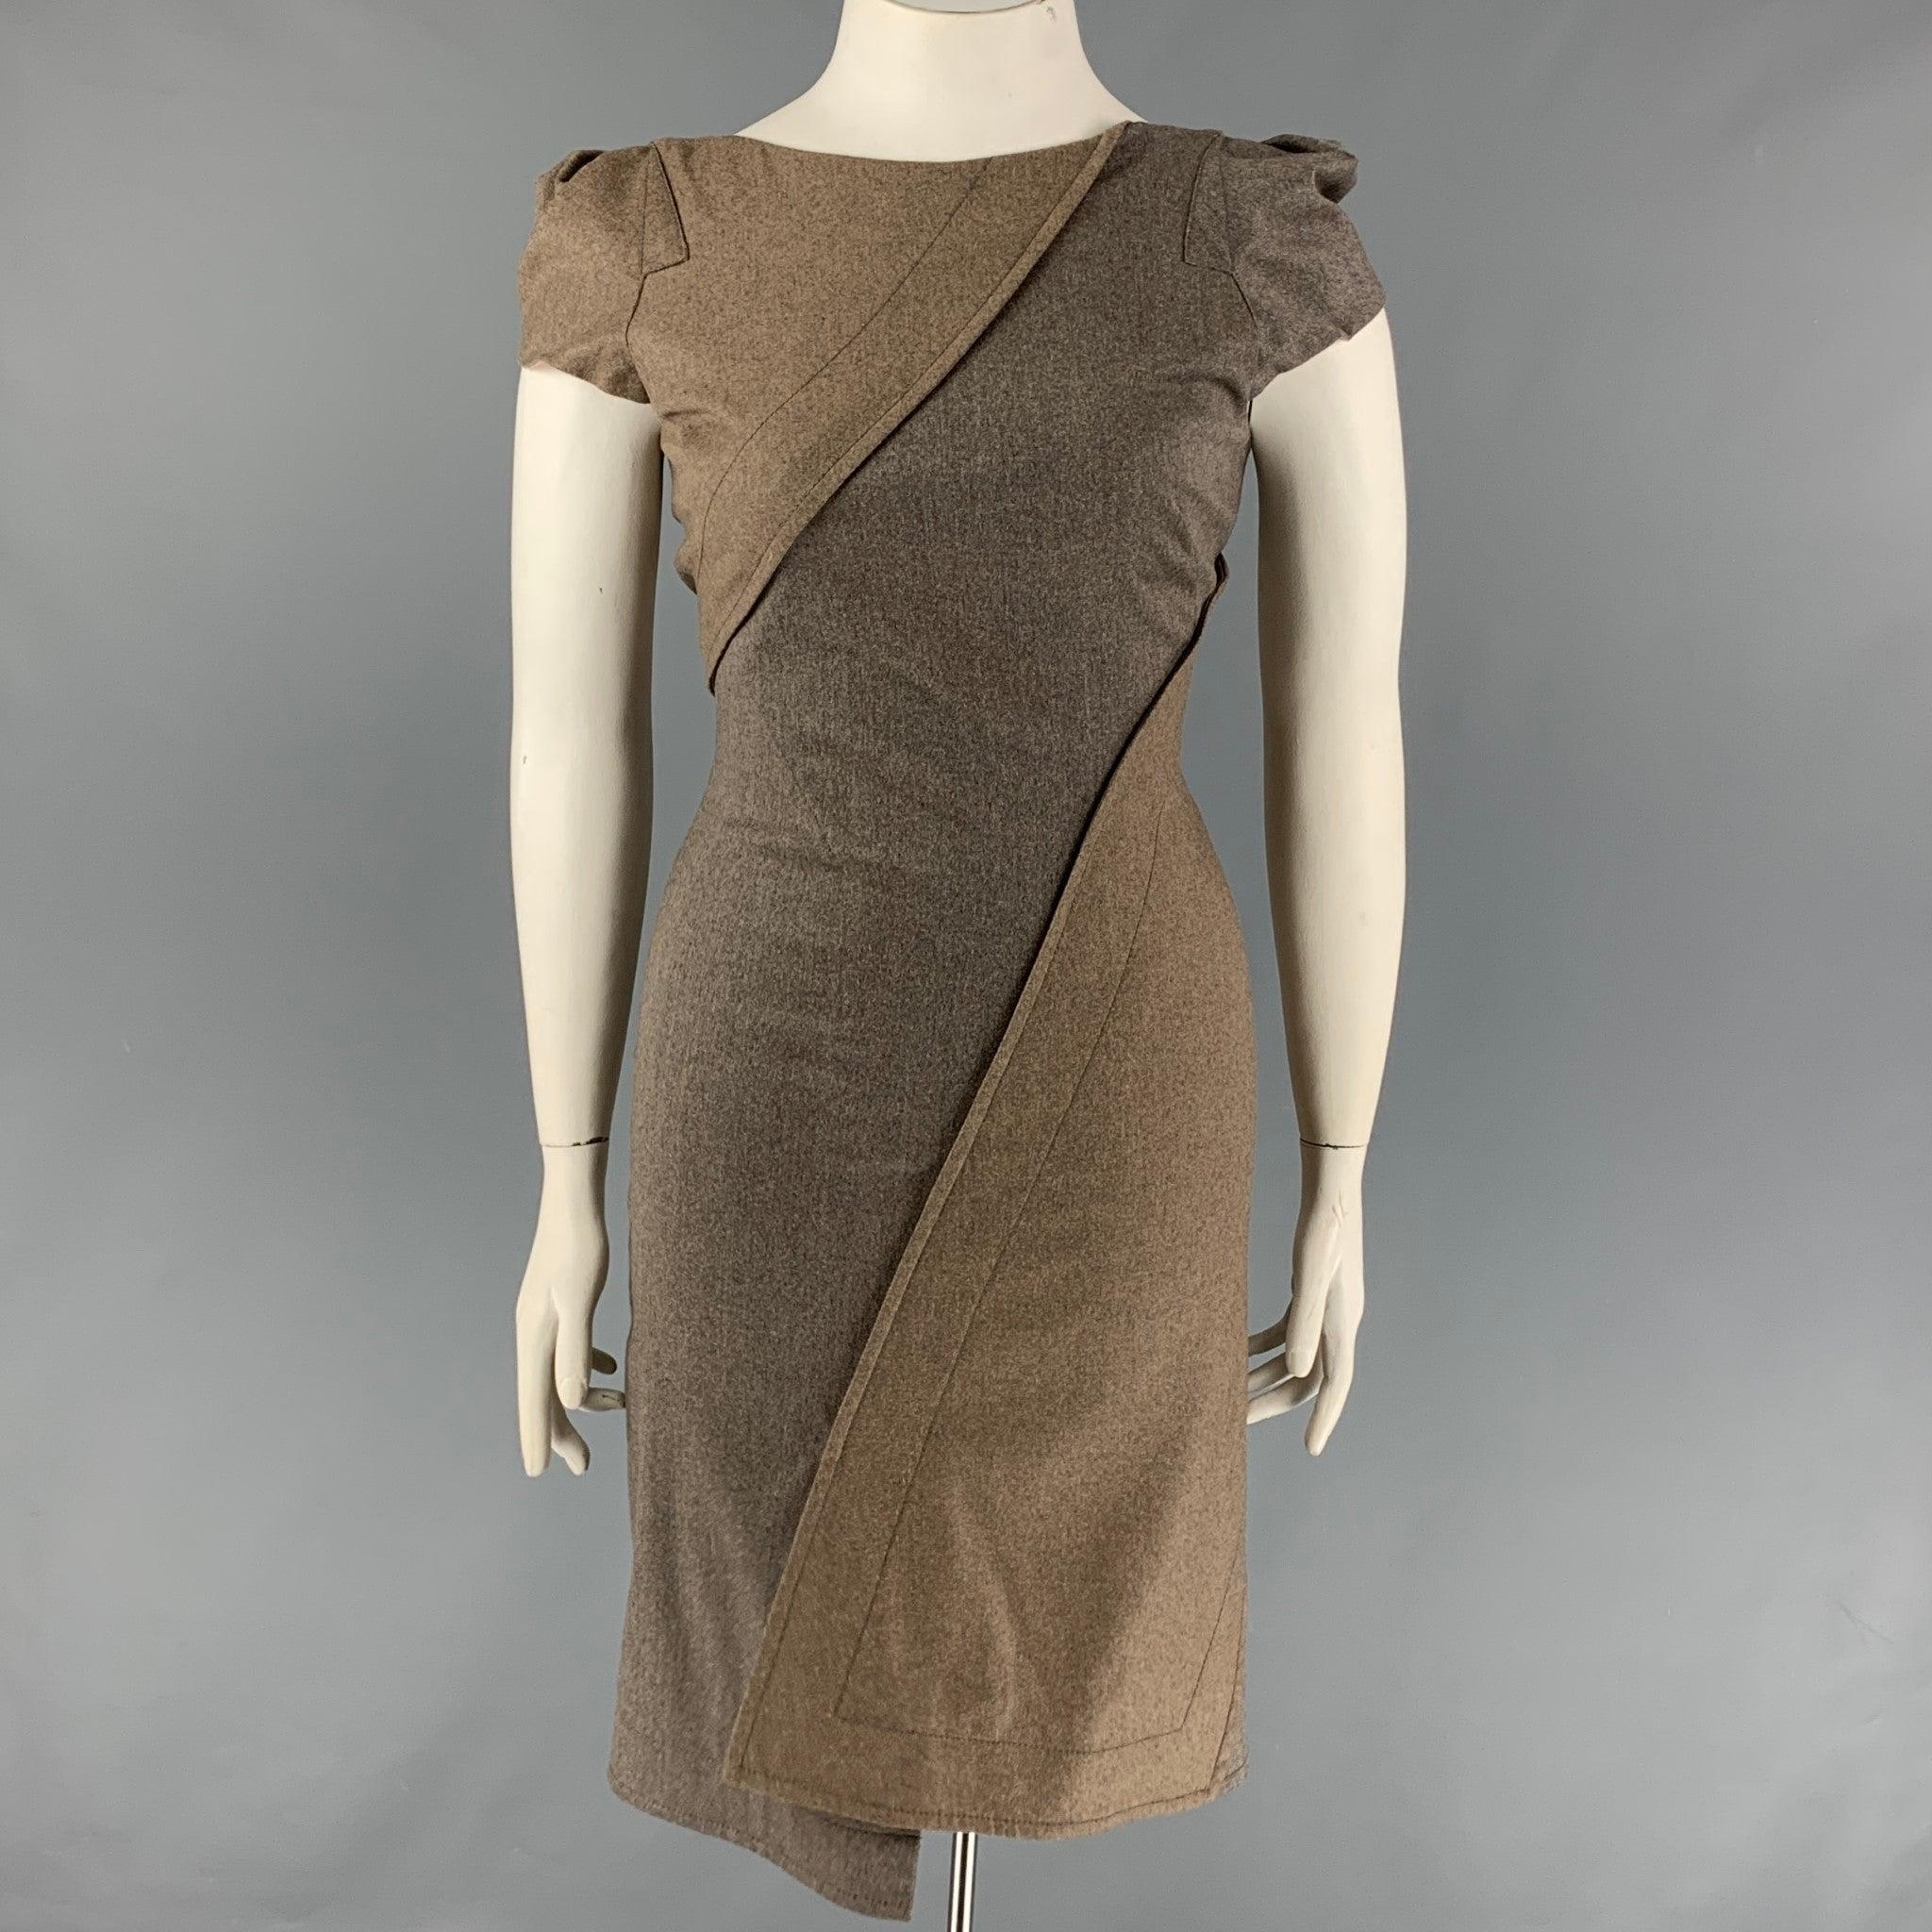 ZAC POSEN dress comes in a grey & brown stripe wool blend featuring a shift style, cap sleeves, bateau neckline, front slit, and a back zip up closure.
New With Tags. 

Marked:   10  

Measurements: 
 
Shoulder: 13 inches  Bust: 32 inches  Waist:
30